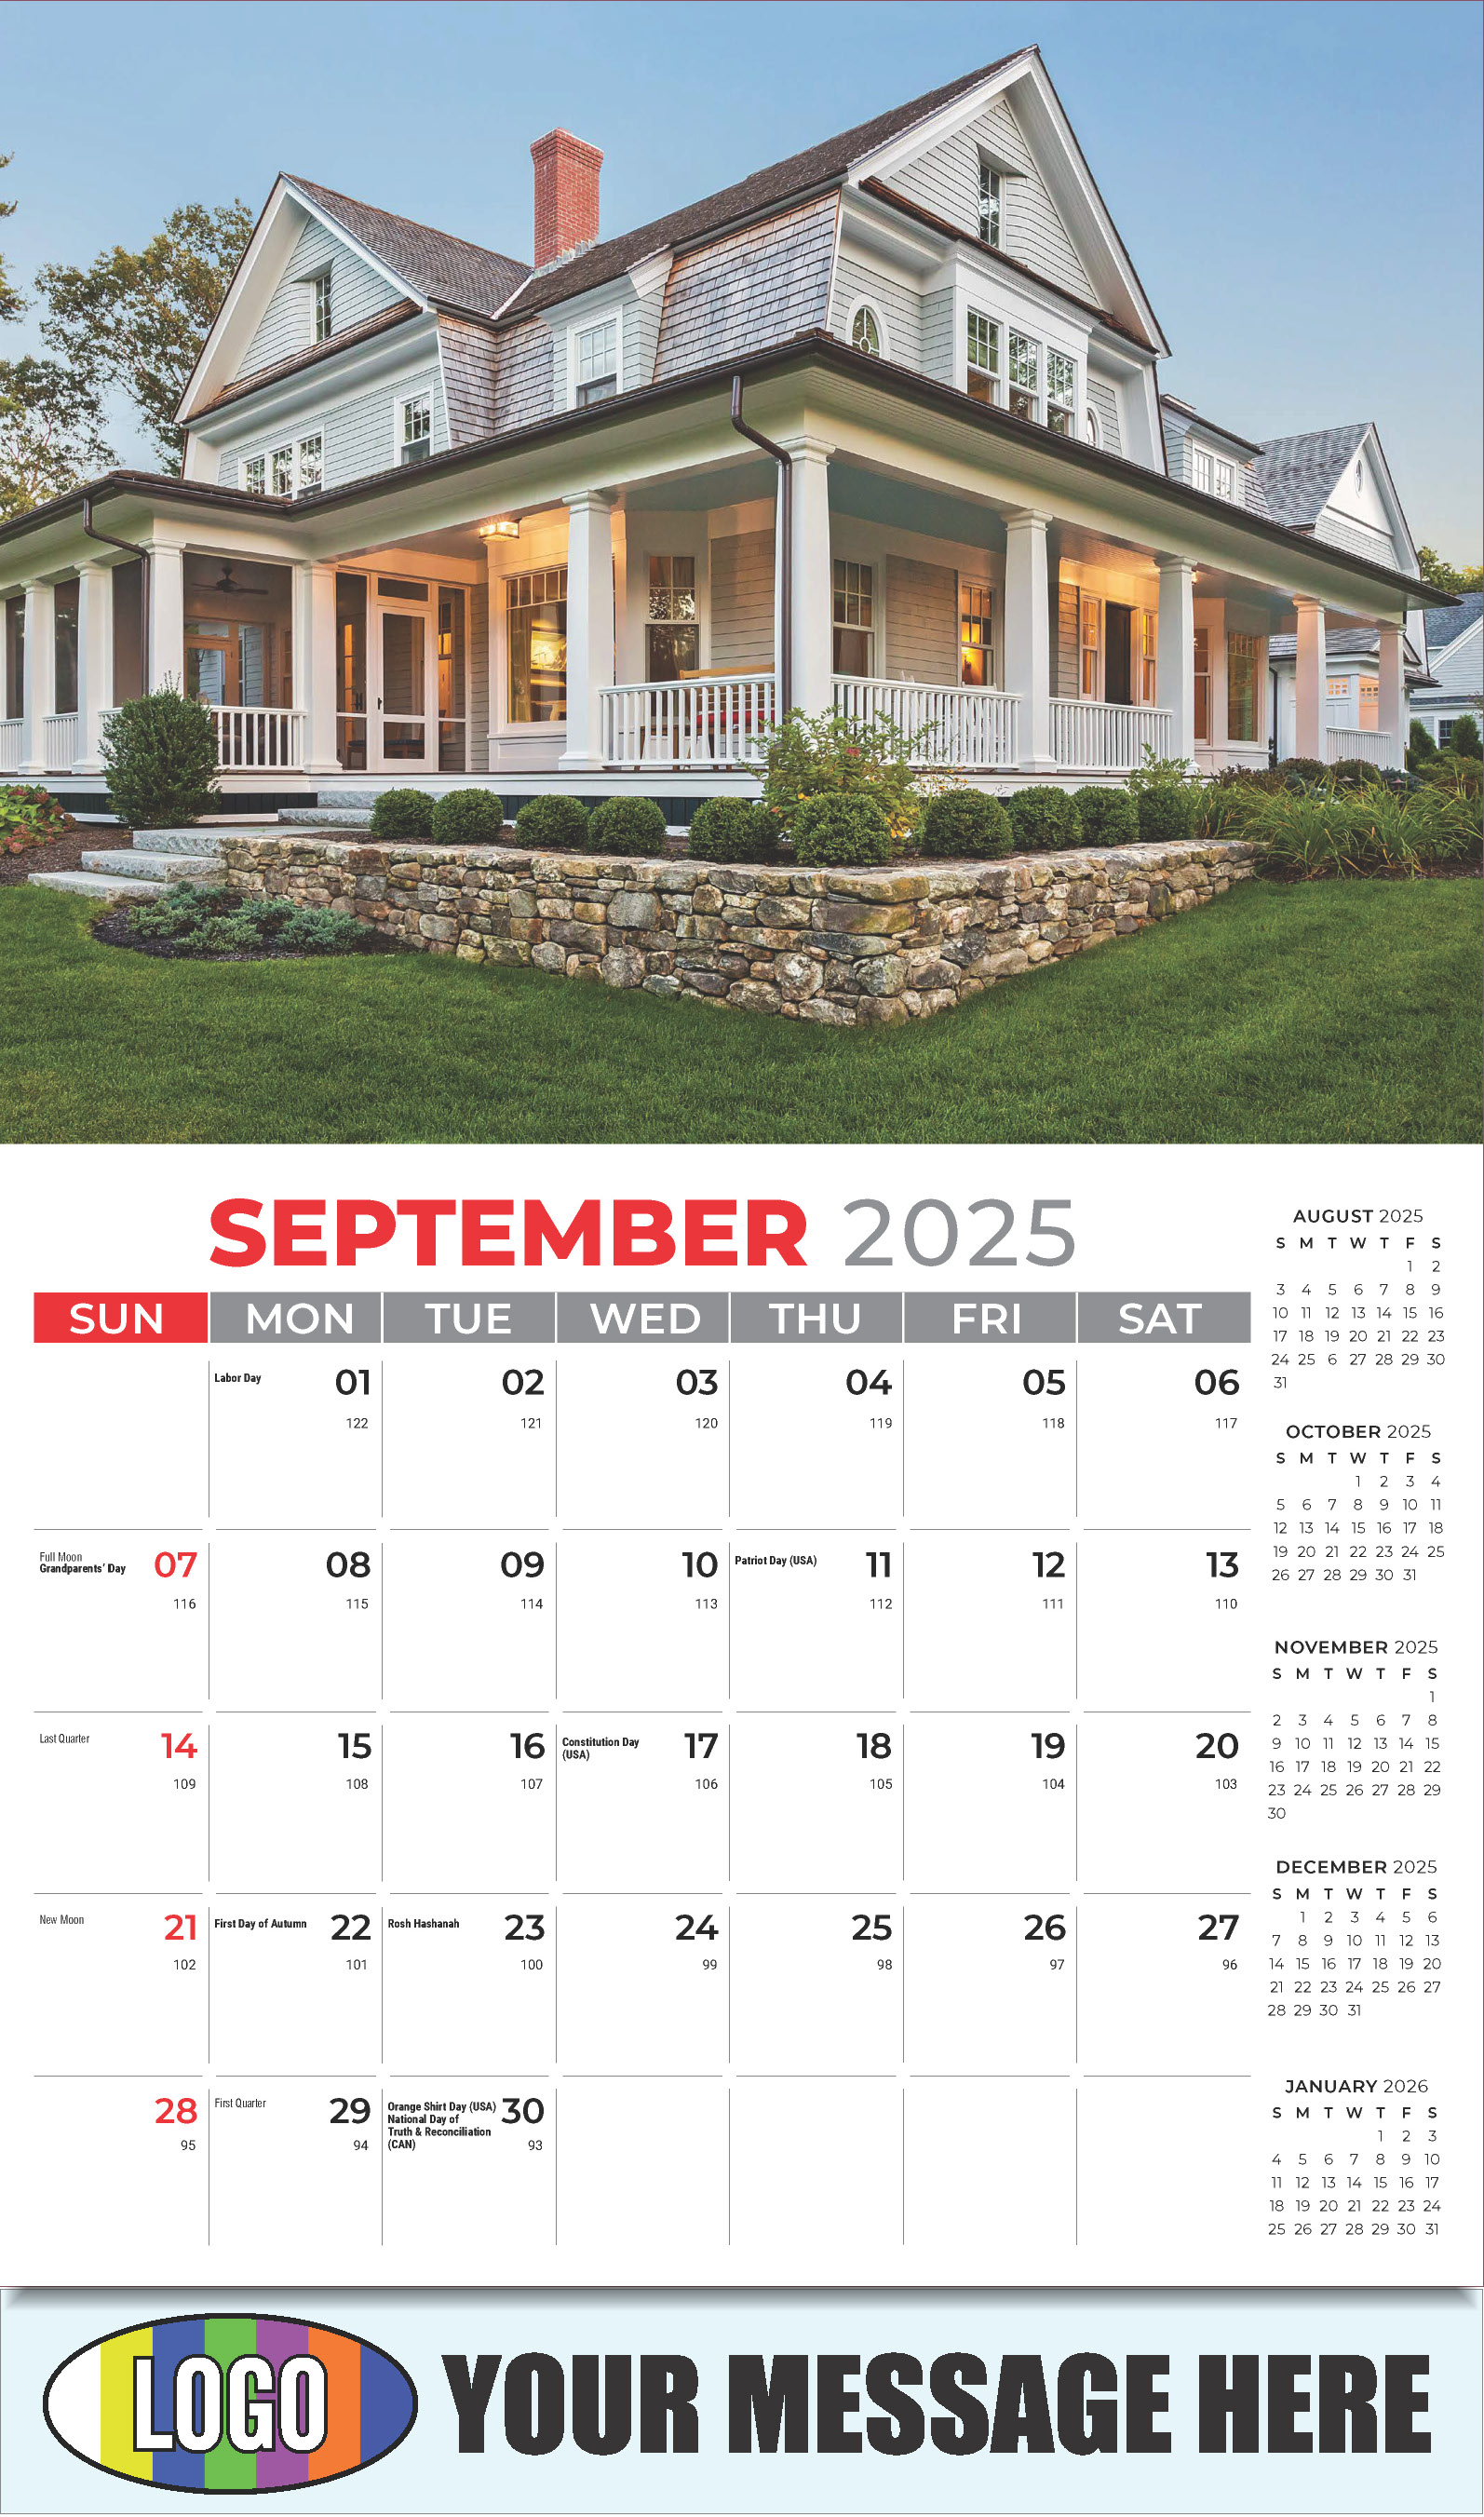 Luxury Homes 2025 Real Estate Agent Promotional Wall Calendar - September